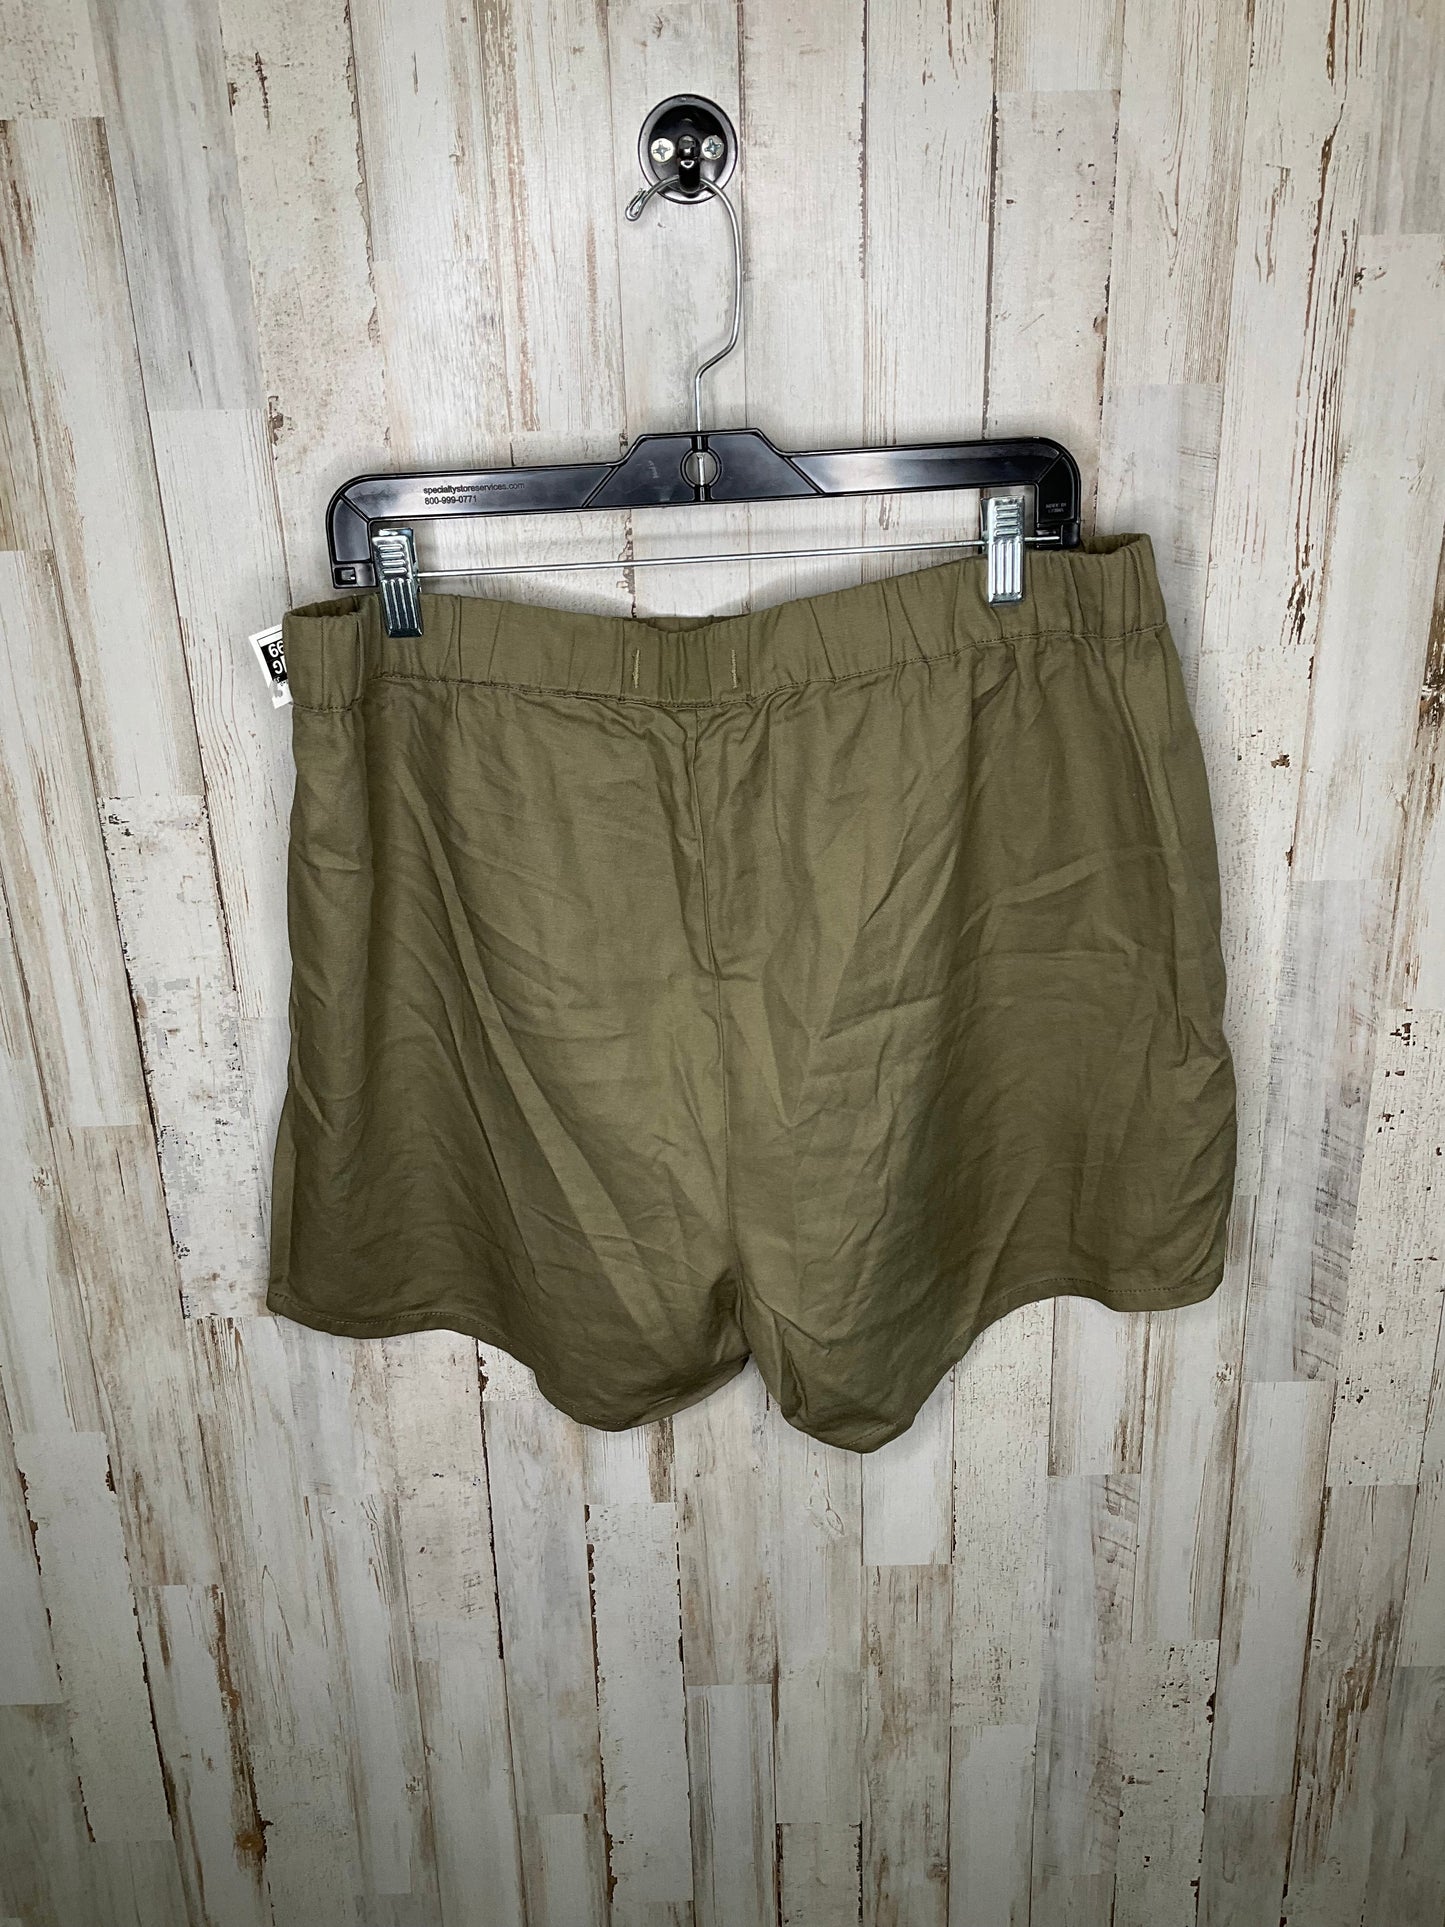 Green Shorts Madewell, Size Xl